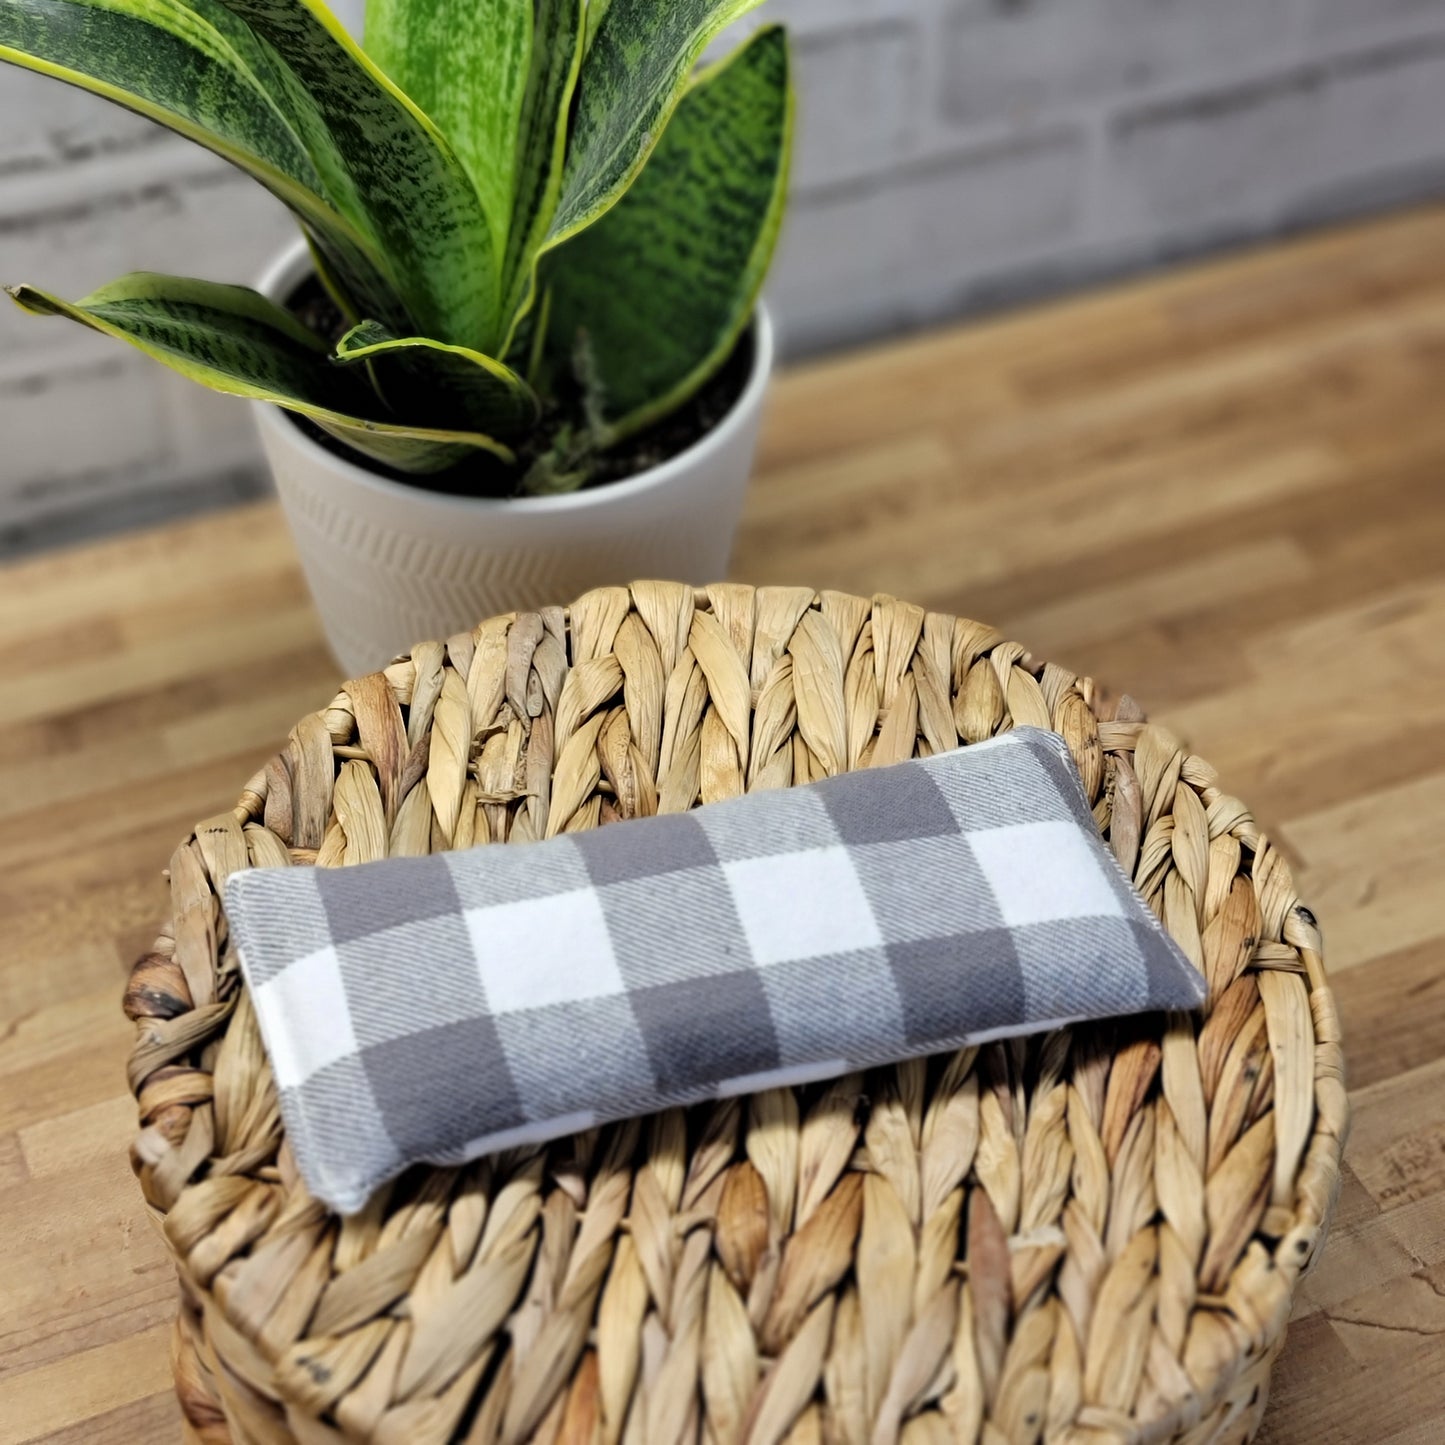 Aromatherapy Hot/Cold Weighted Eye Pillow - Classic Patterns